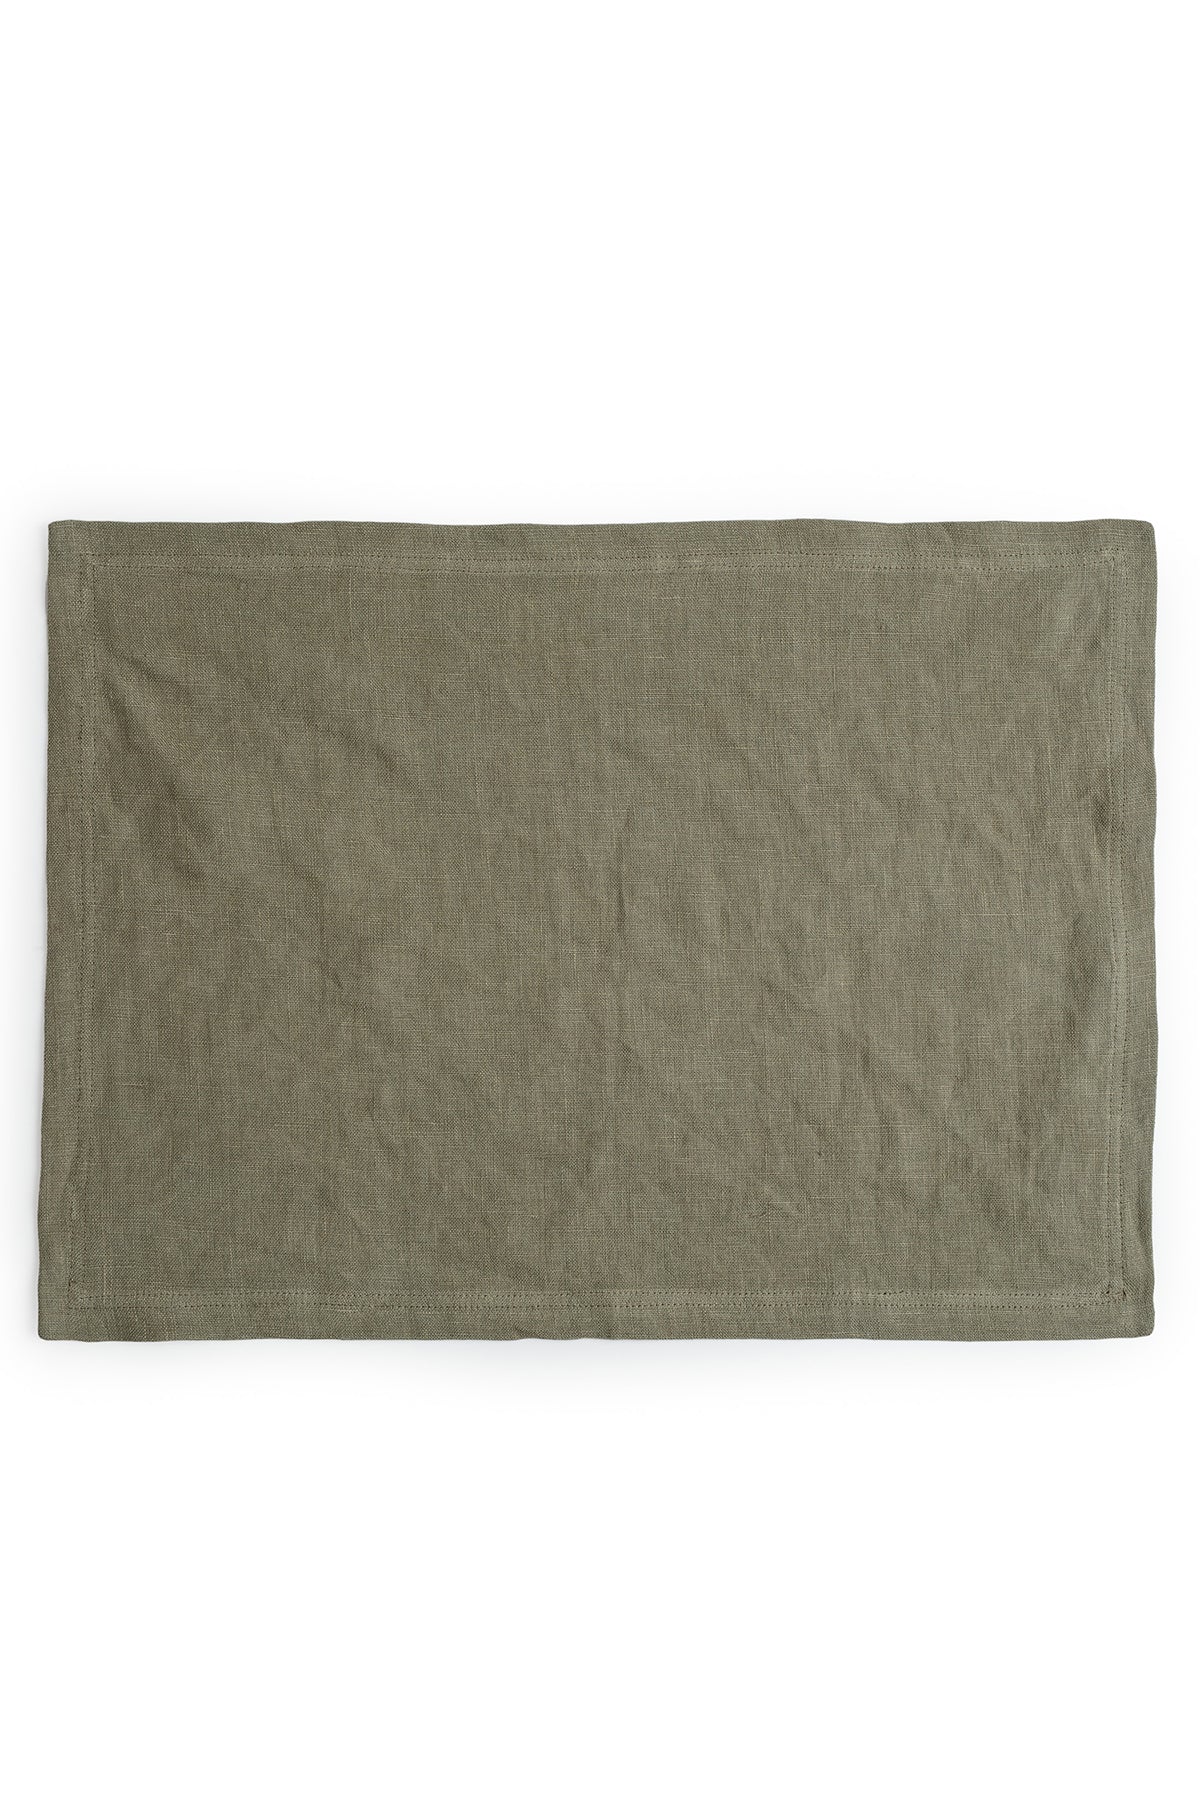 A plain green dyed Jenny Graham Home linen placemat displayed on a white background.-15072810205377